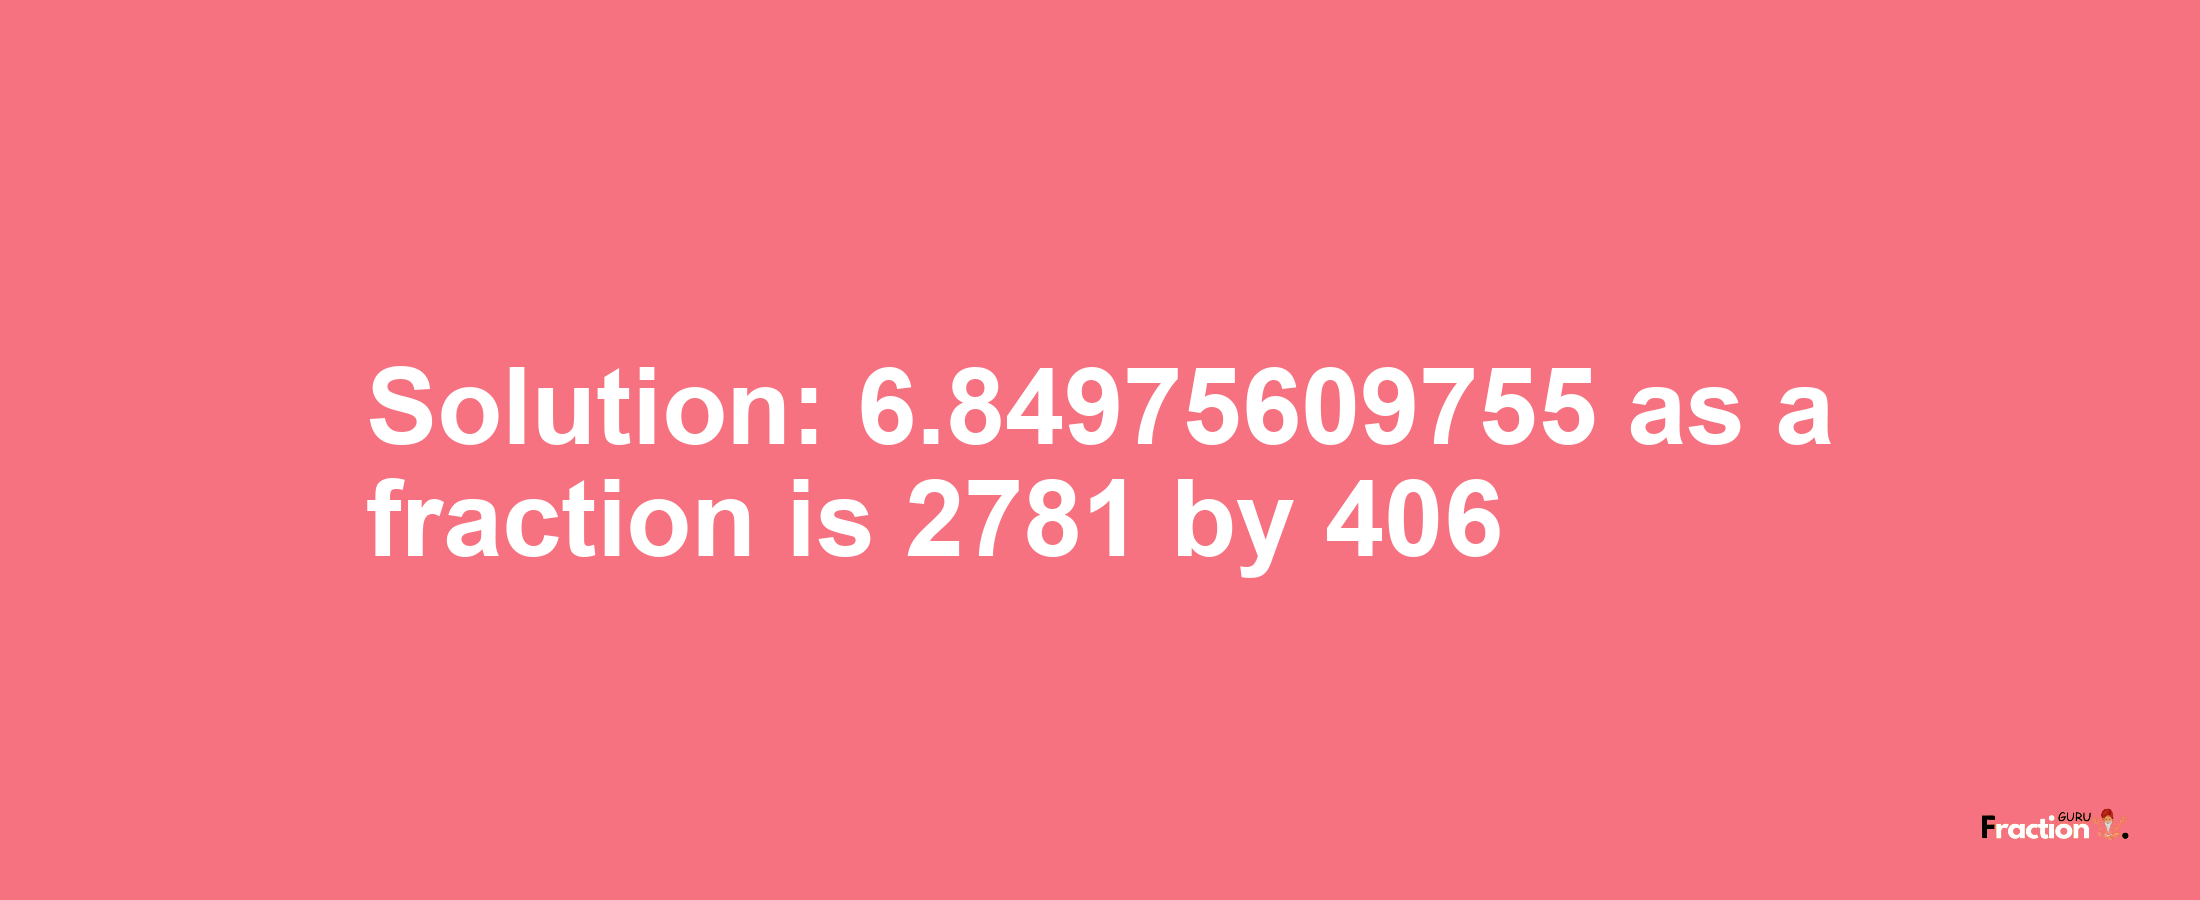 Solution:6.84975609755 as a fraction is 2781/406